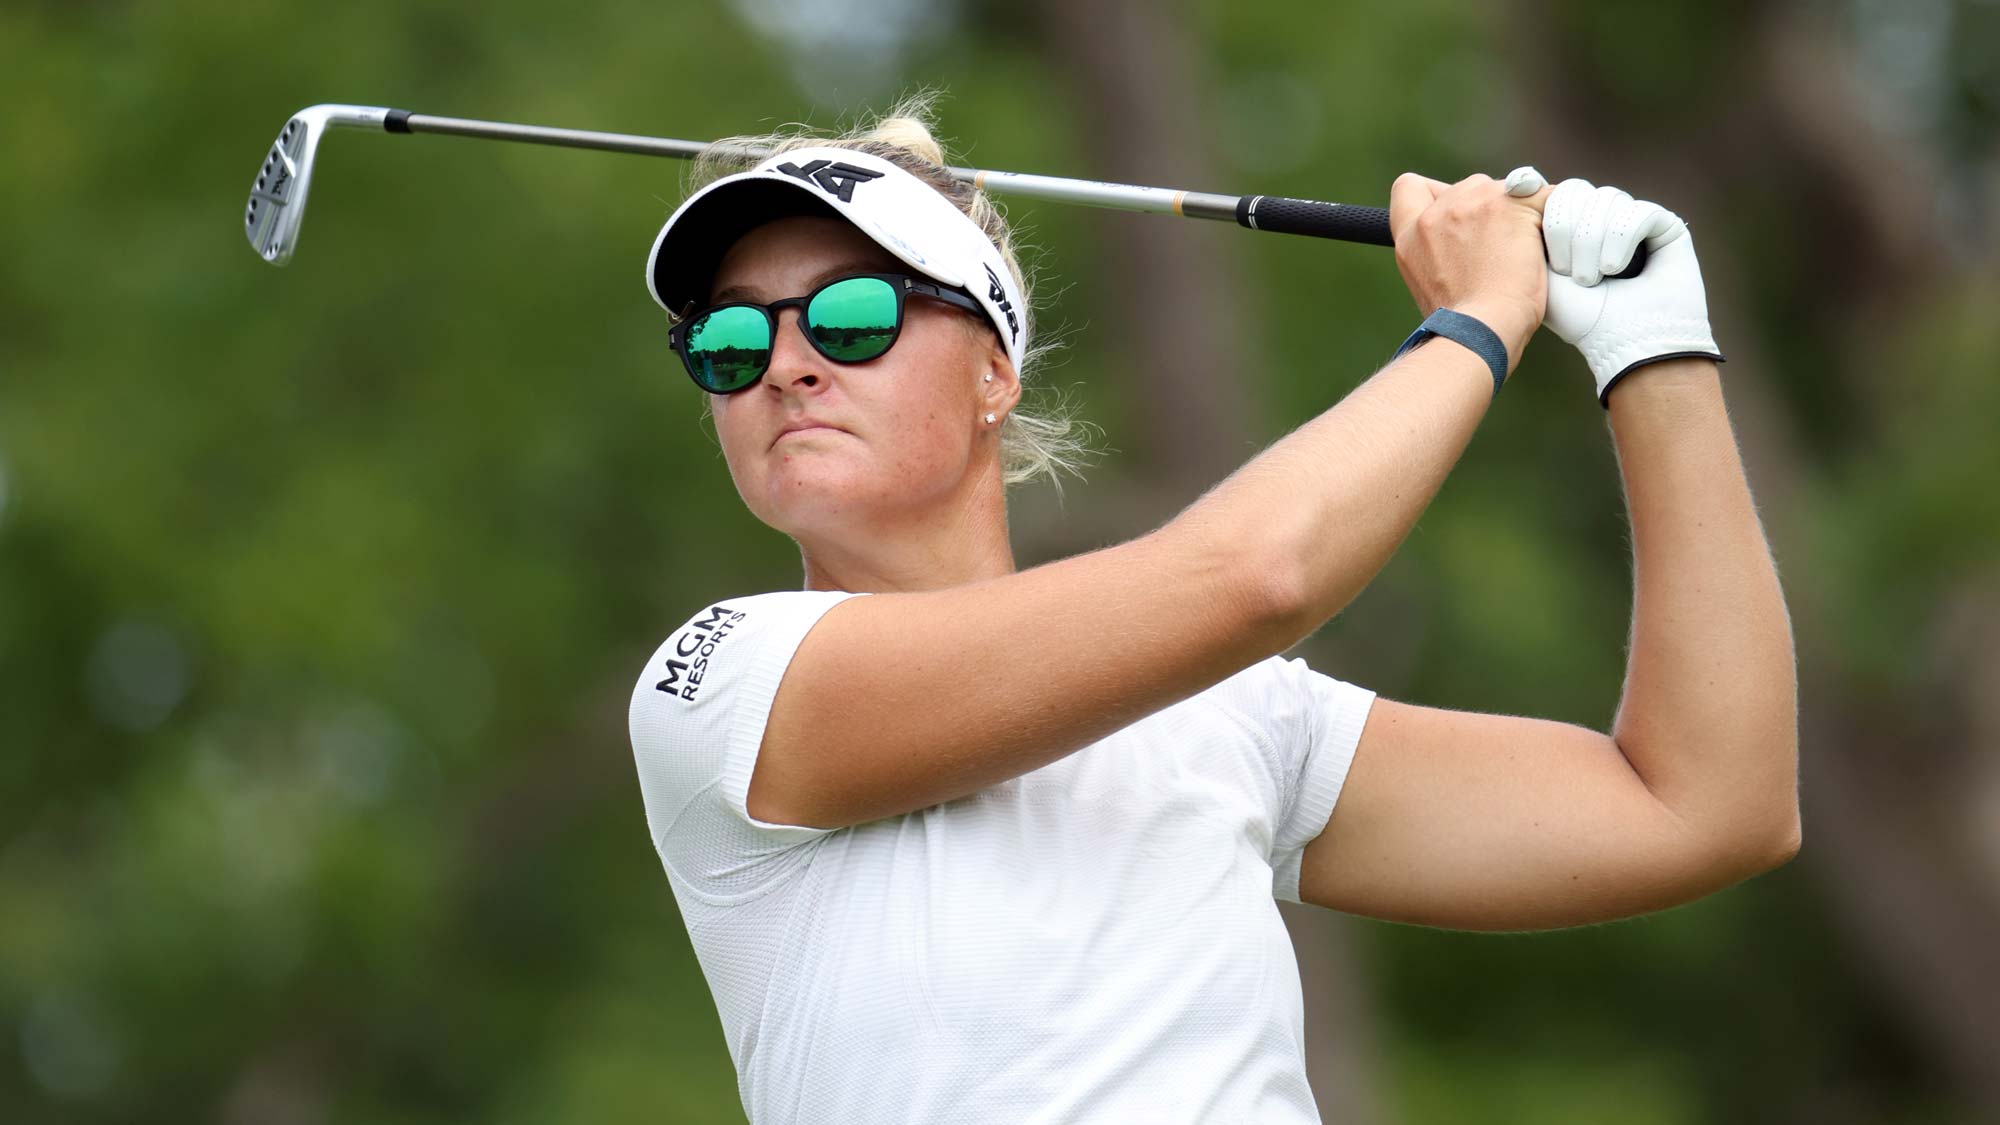 Anna Nordqvist of Sweden hits her first shot on the 3rd hole during the second round of the Walmart NW Arkansas Championship